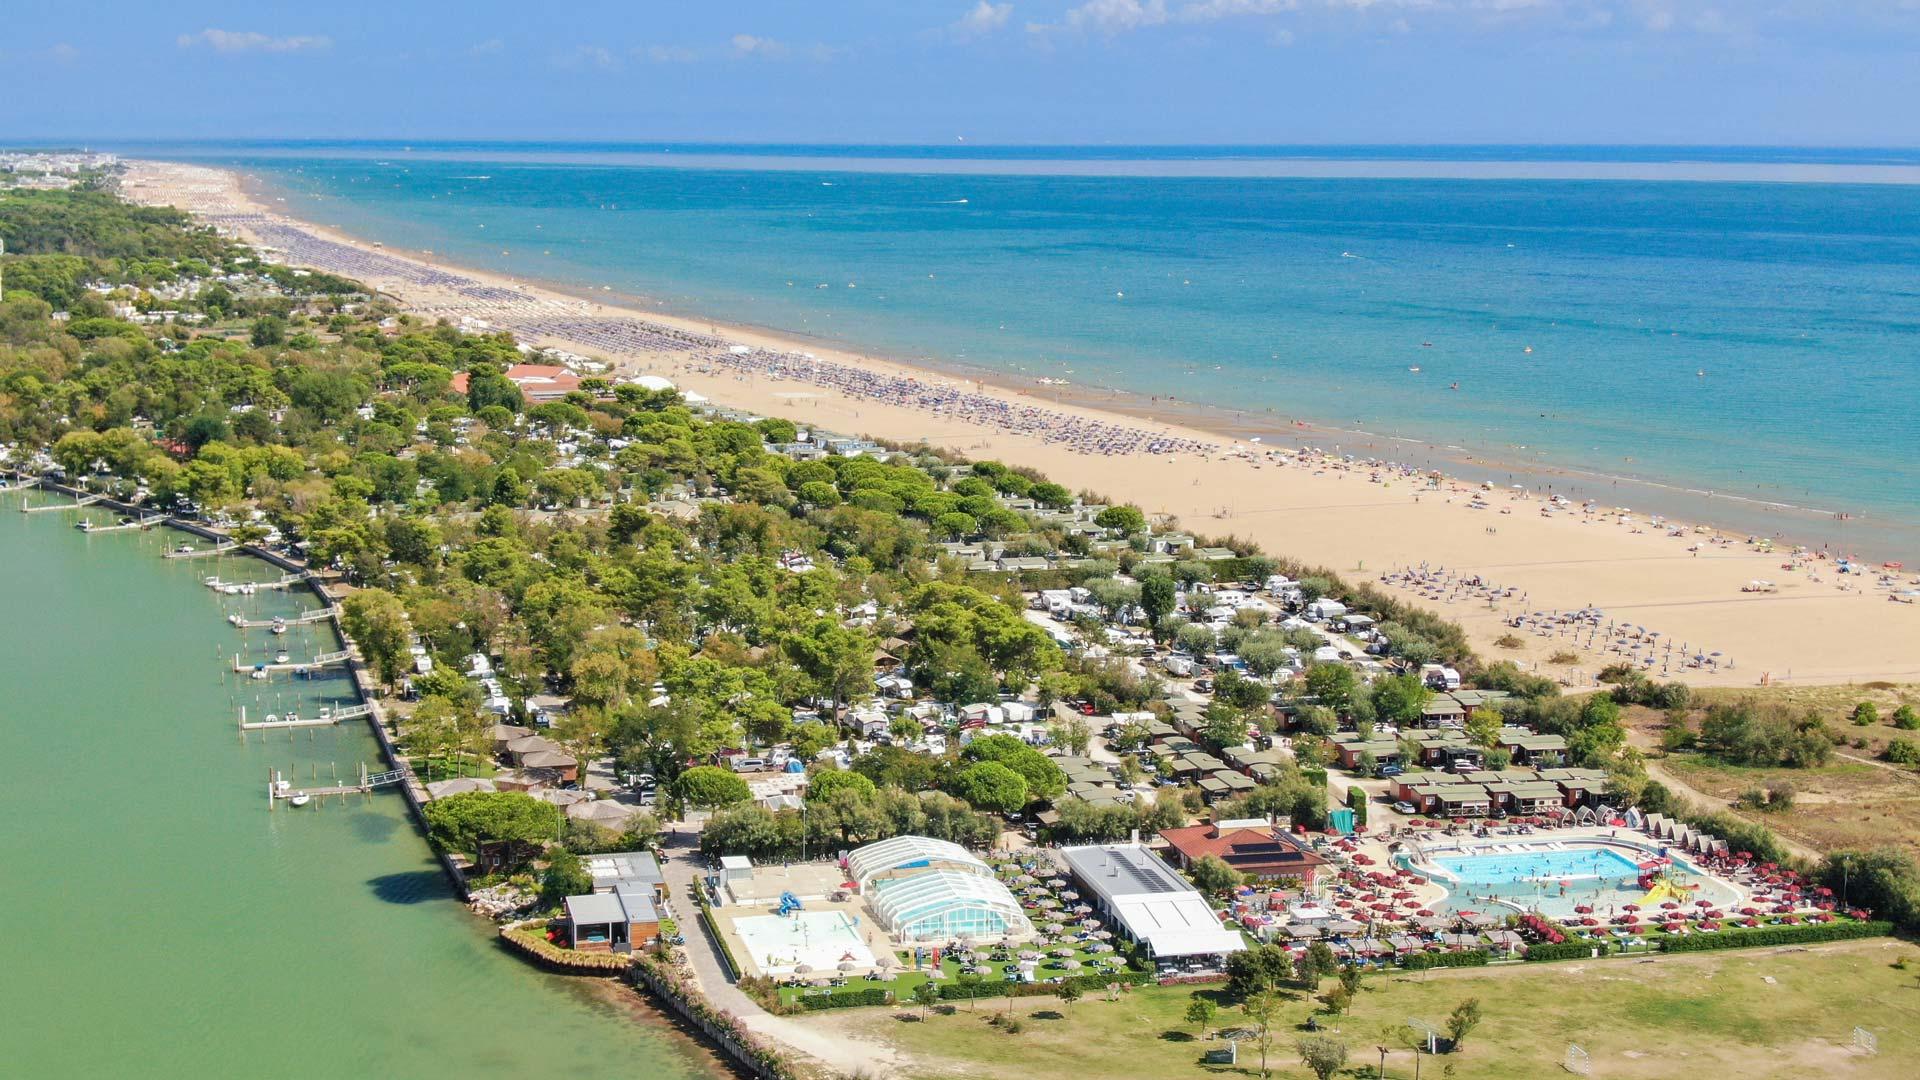 capalonga en holiday-on-campsite-in-bibione-weekly-offer-on-pitches 014